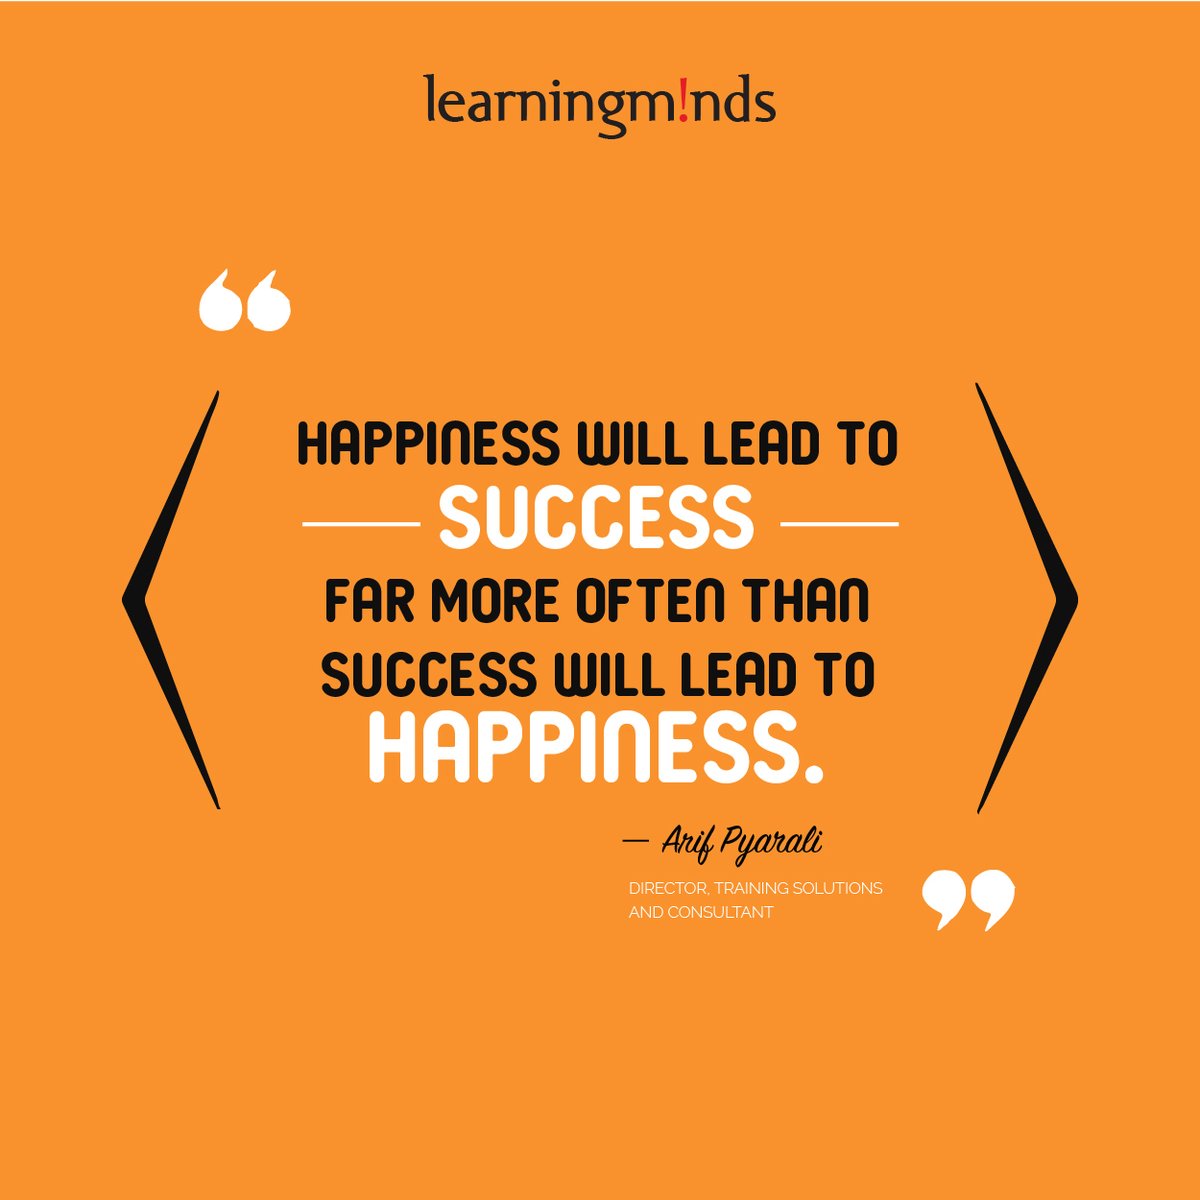 Learning Minds Happiness Will Lead To Success Far More Often Than Success Will Lead To Happiness Drarifpyarali Learningminds Learningforlife Happiness Joy Success Spreadhappiness Kindness Smile Selflove Mindfulness